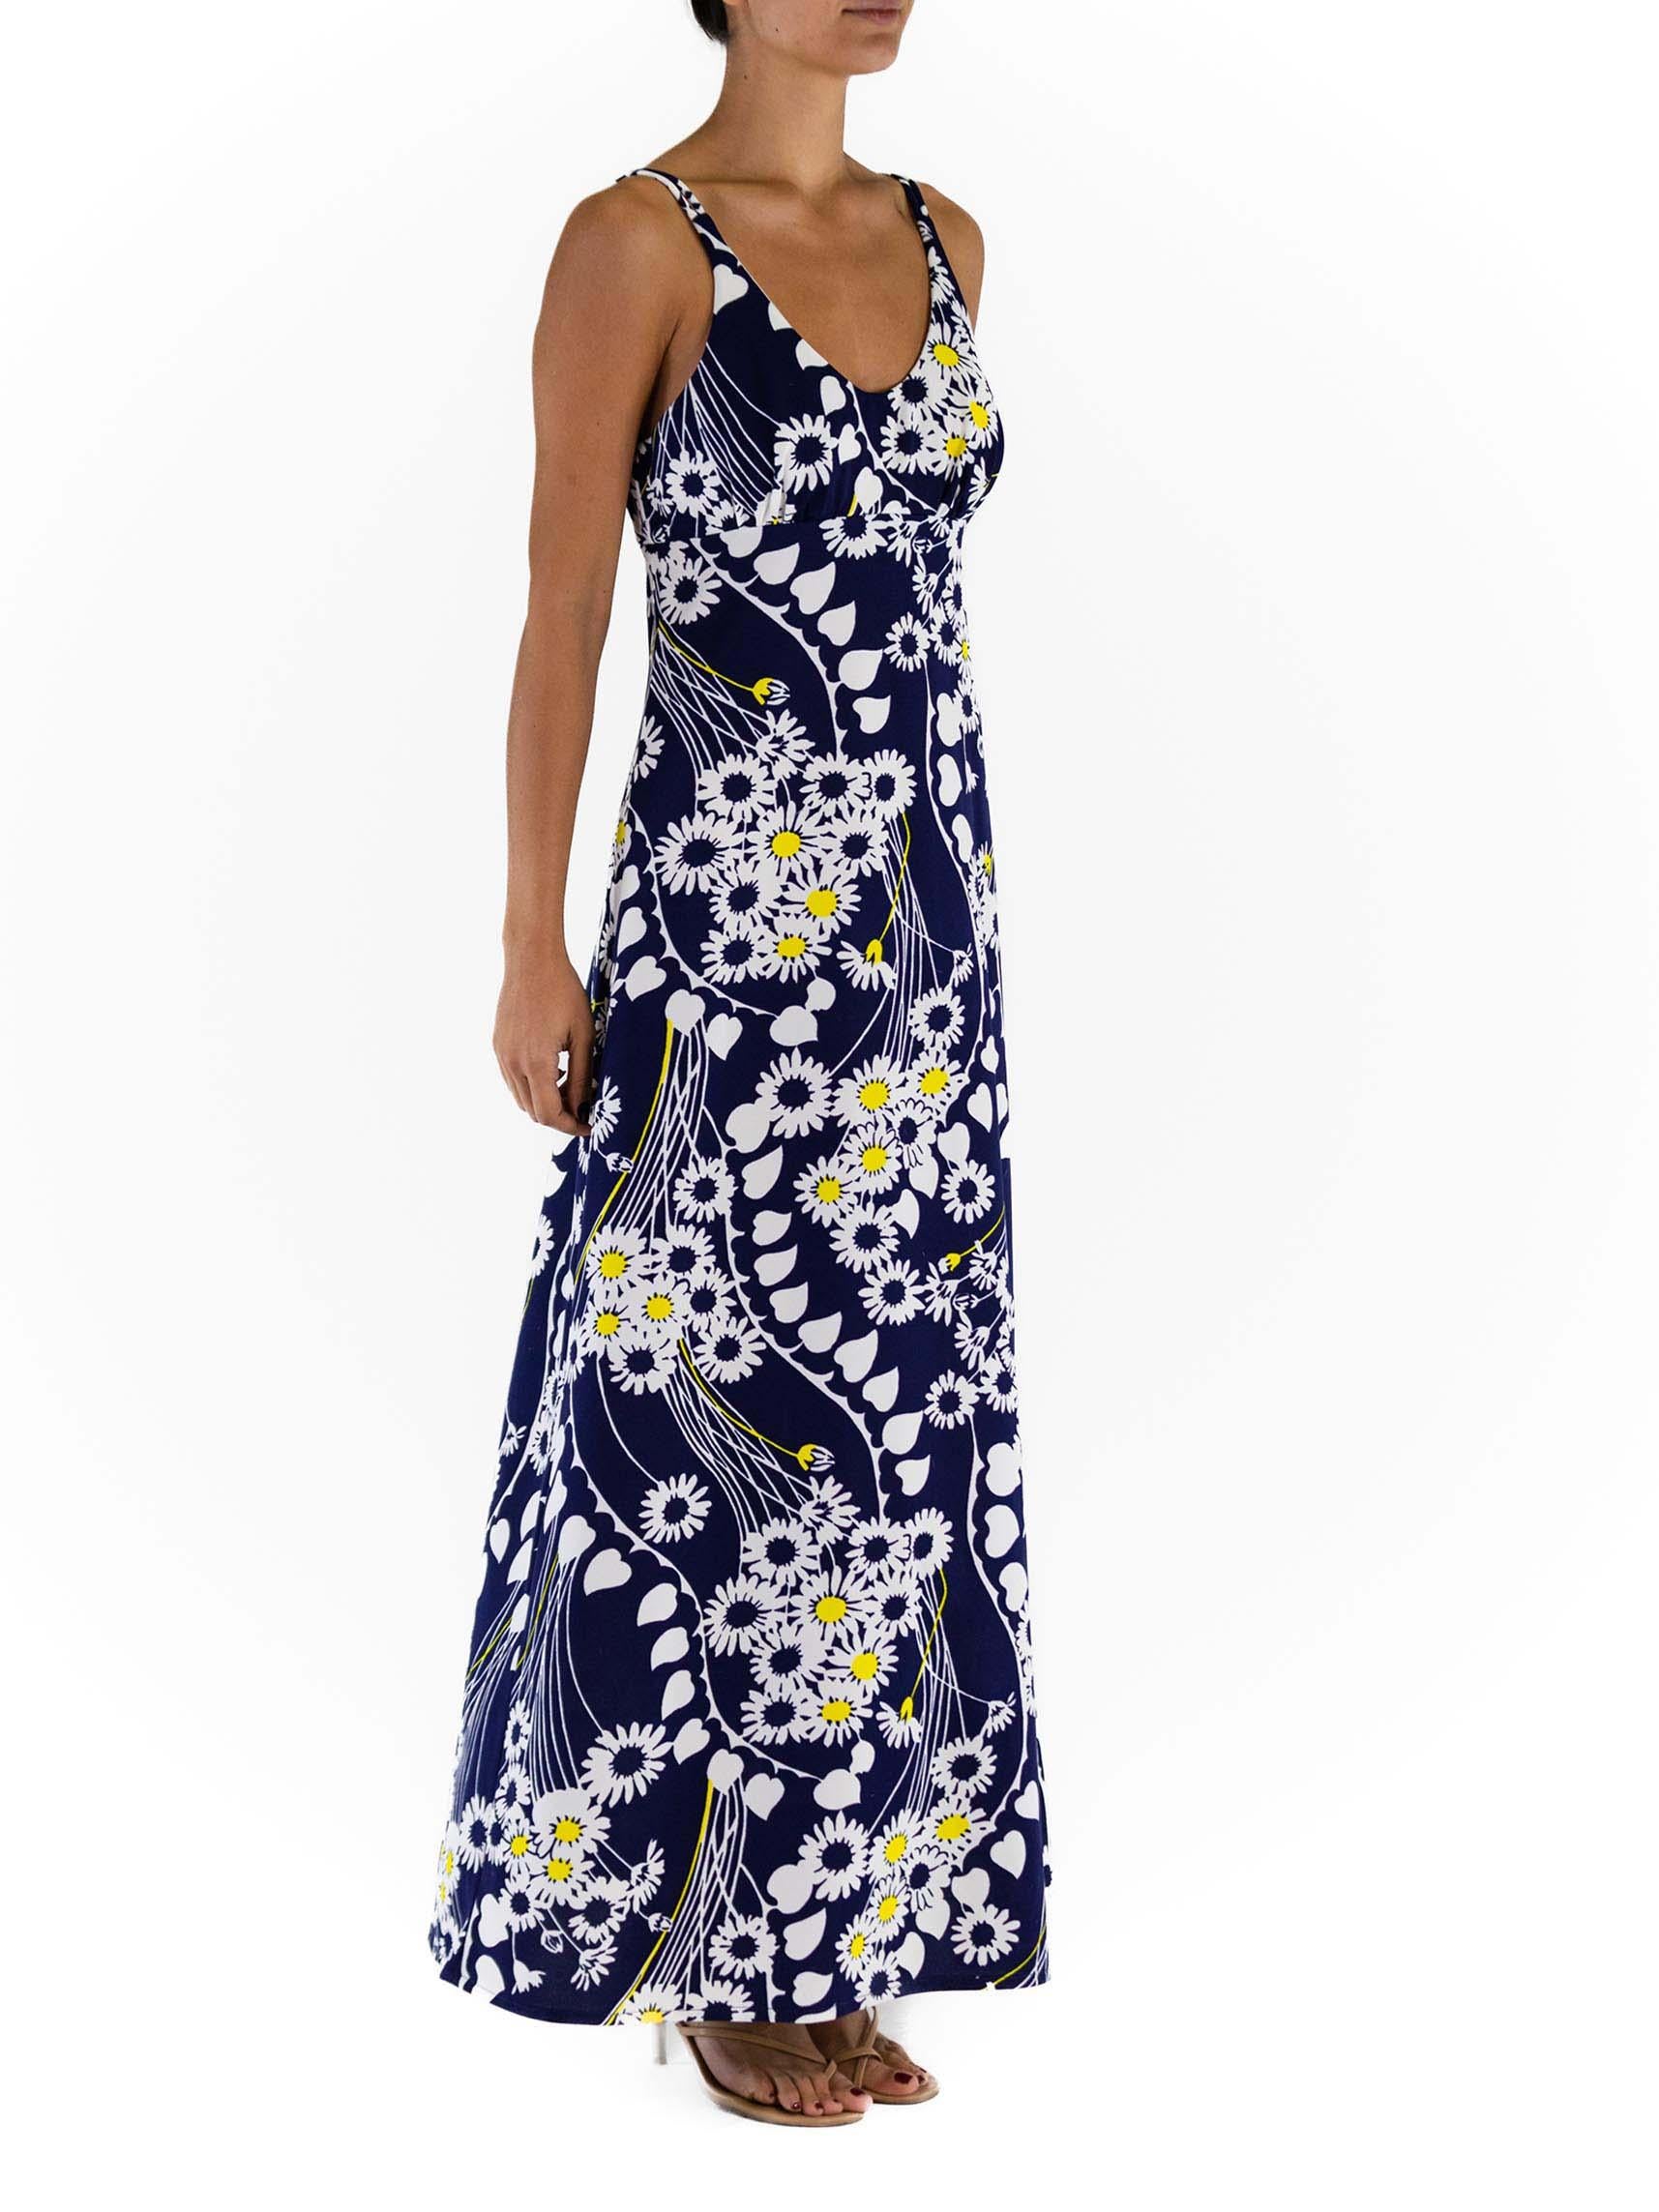 Women's or Men's 1970s Navy Blue Polyester Jersey White & Yellow Mod Floral Maxi Dress For Sale